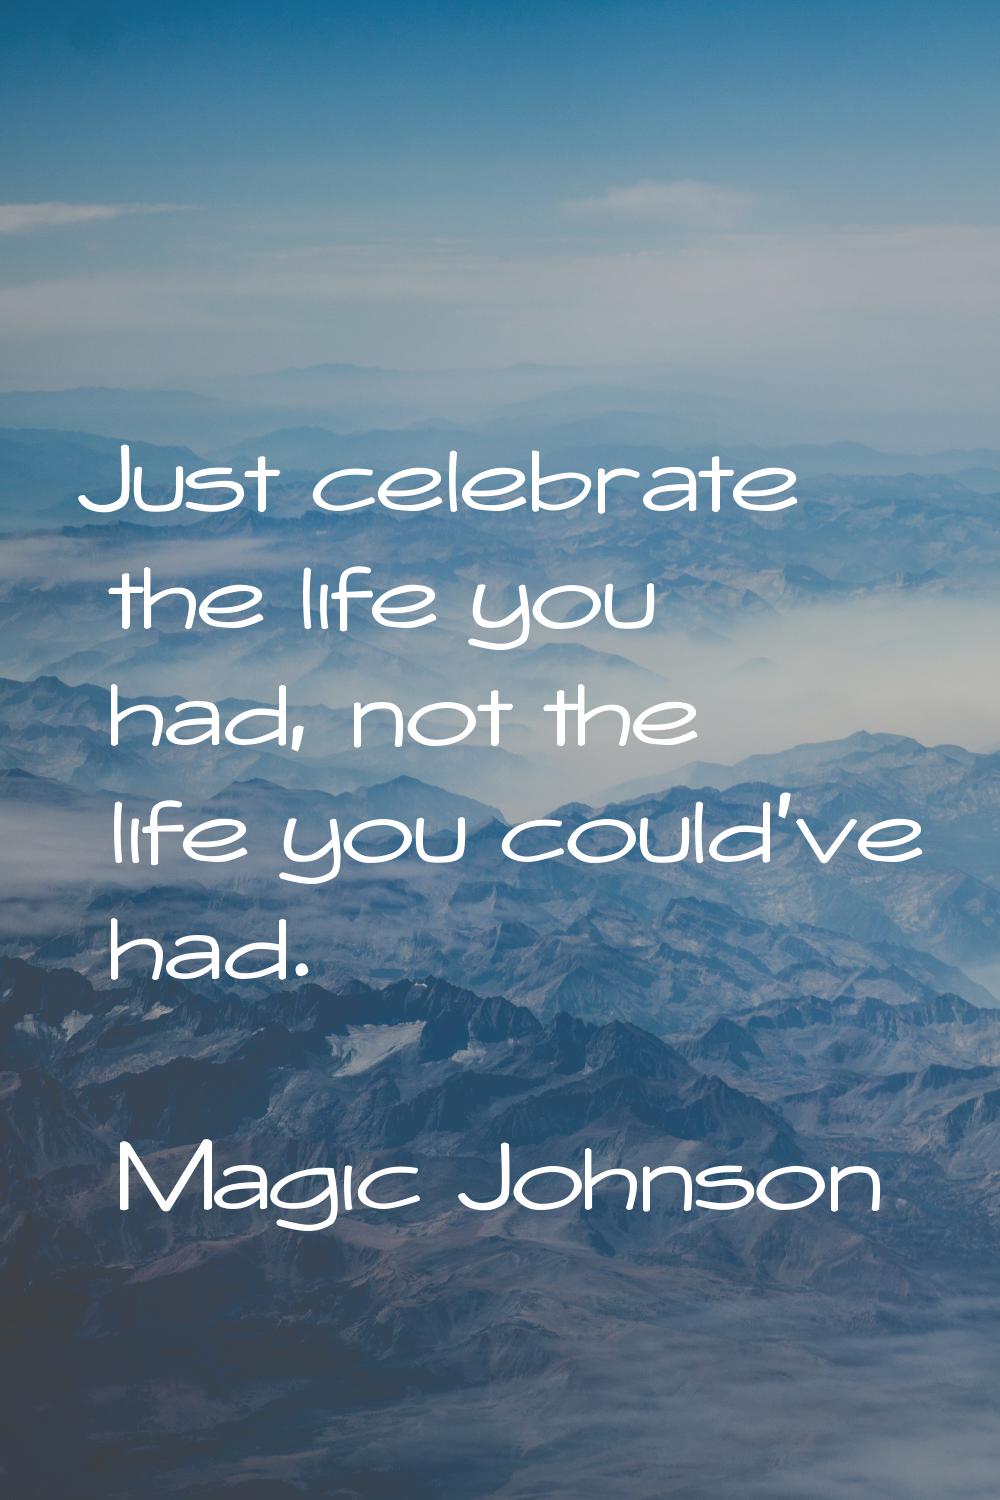 Just celebrate the life you had, not the life you could've had.